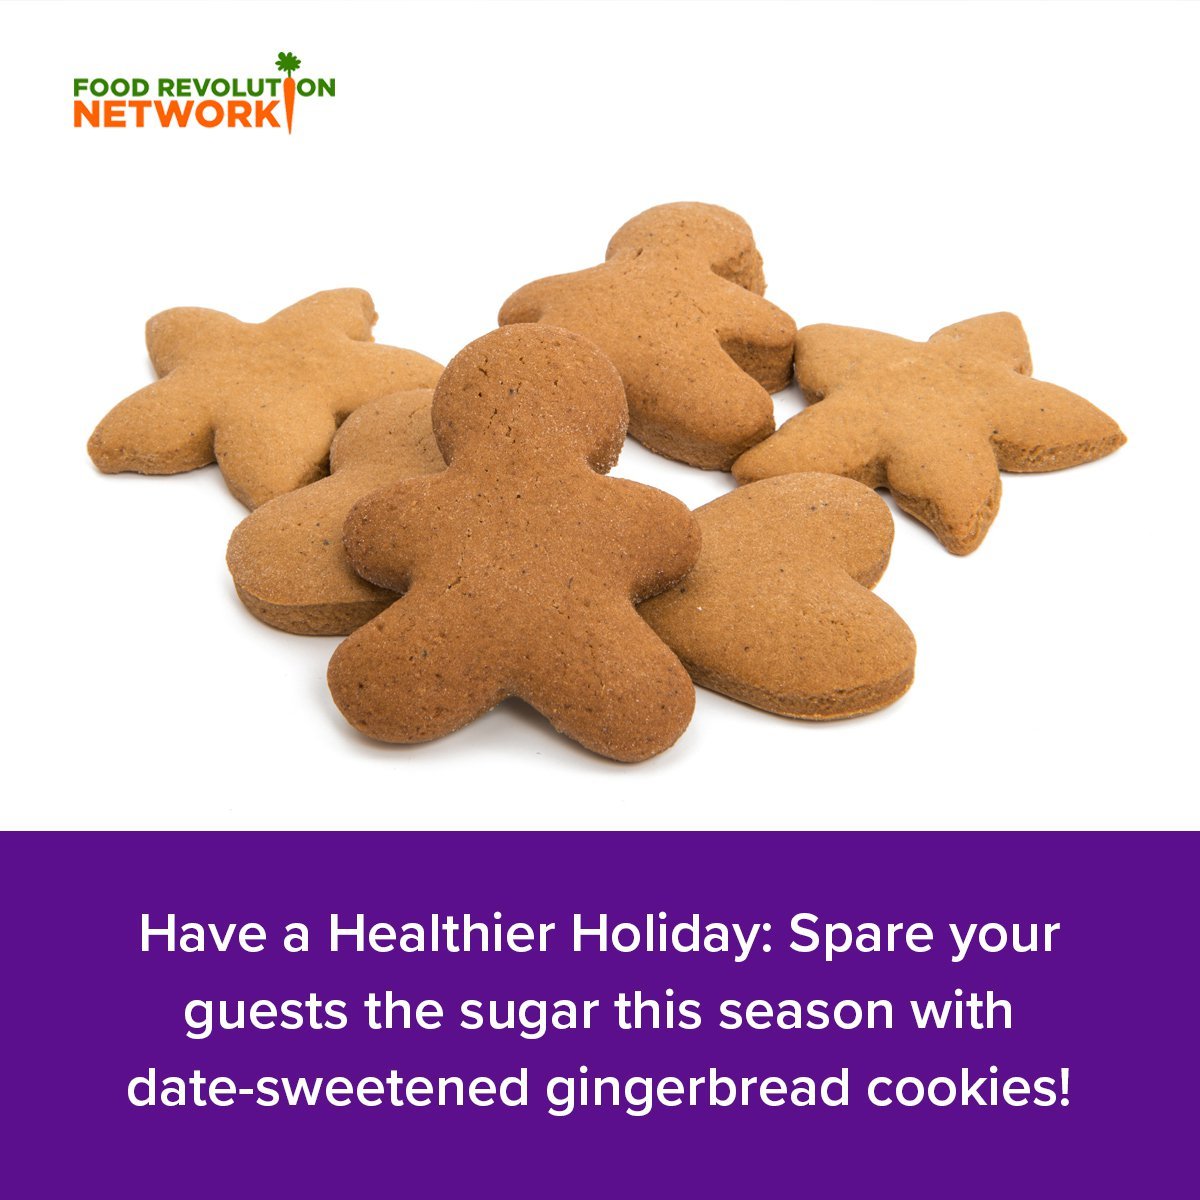 Have a Healthier Holiday: Spare your guests the sugar this season with date-sweetened gingerbread cookies!